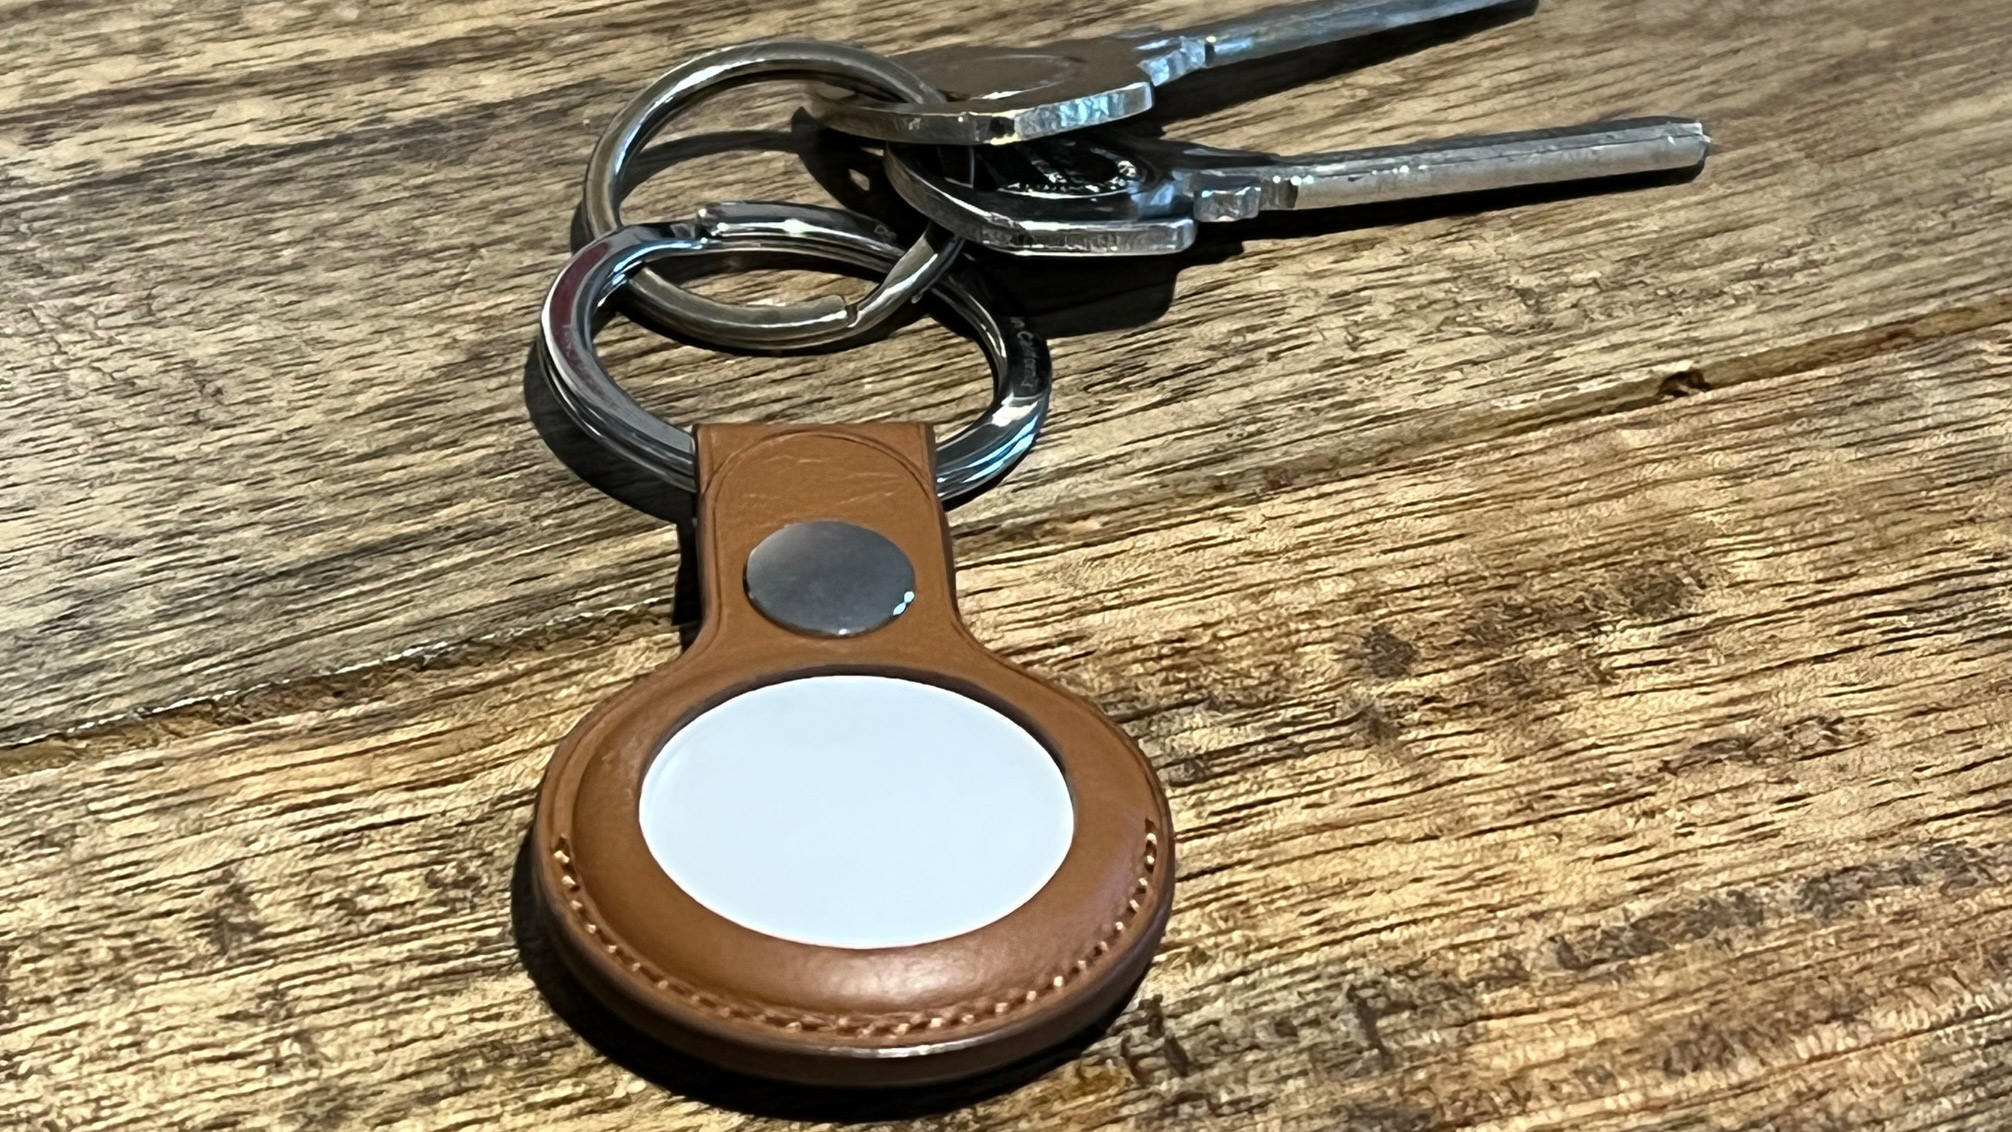 an Apple AirTag in a brown leather key fob holder, attached to some keys on a wooden surface